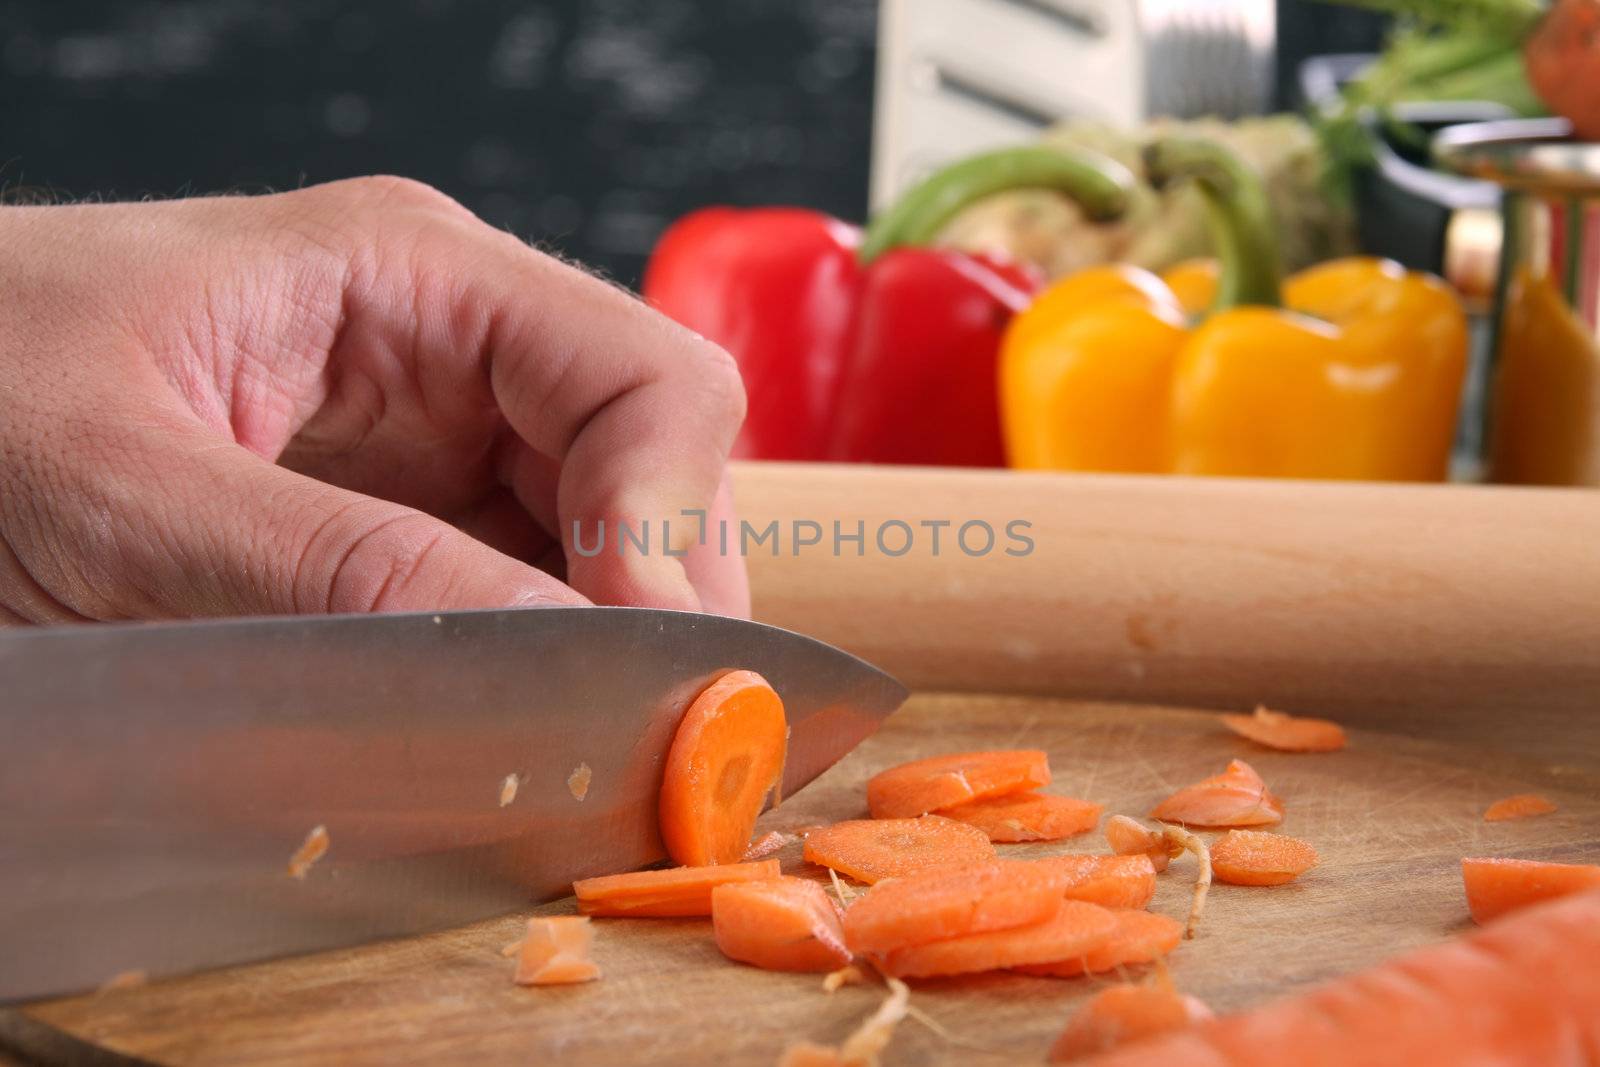 chef preparing lunch and cutting carrot with knife